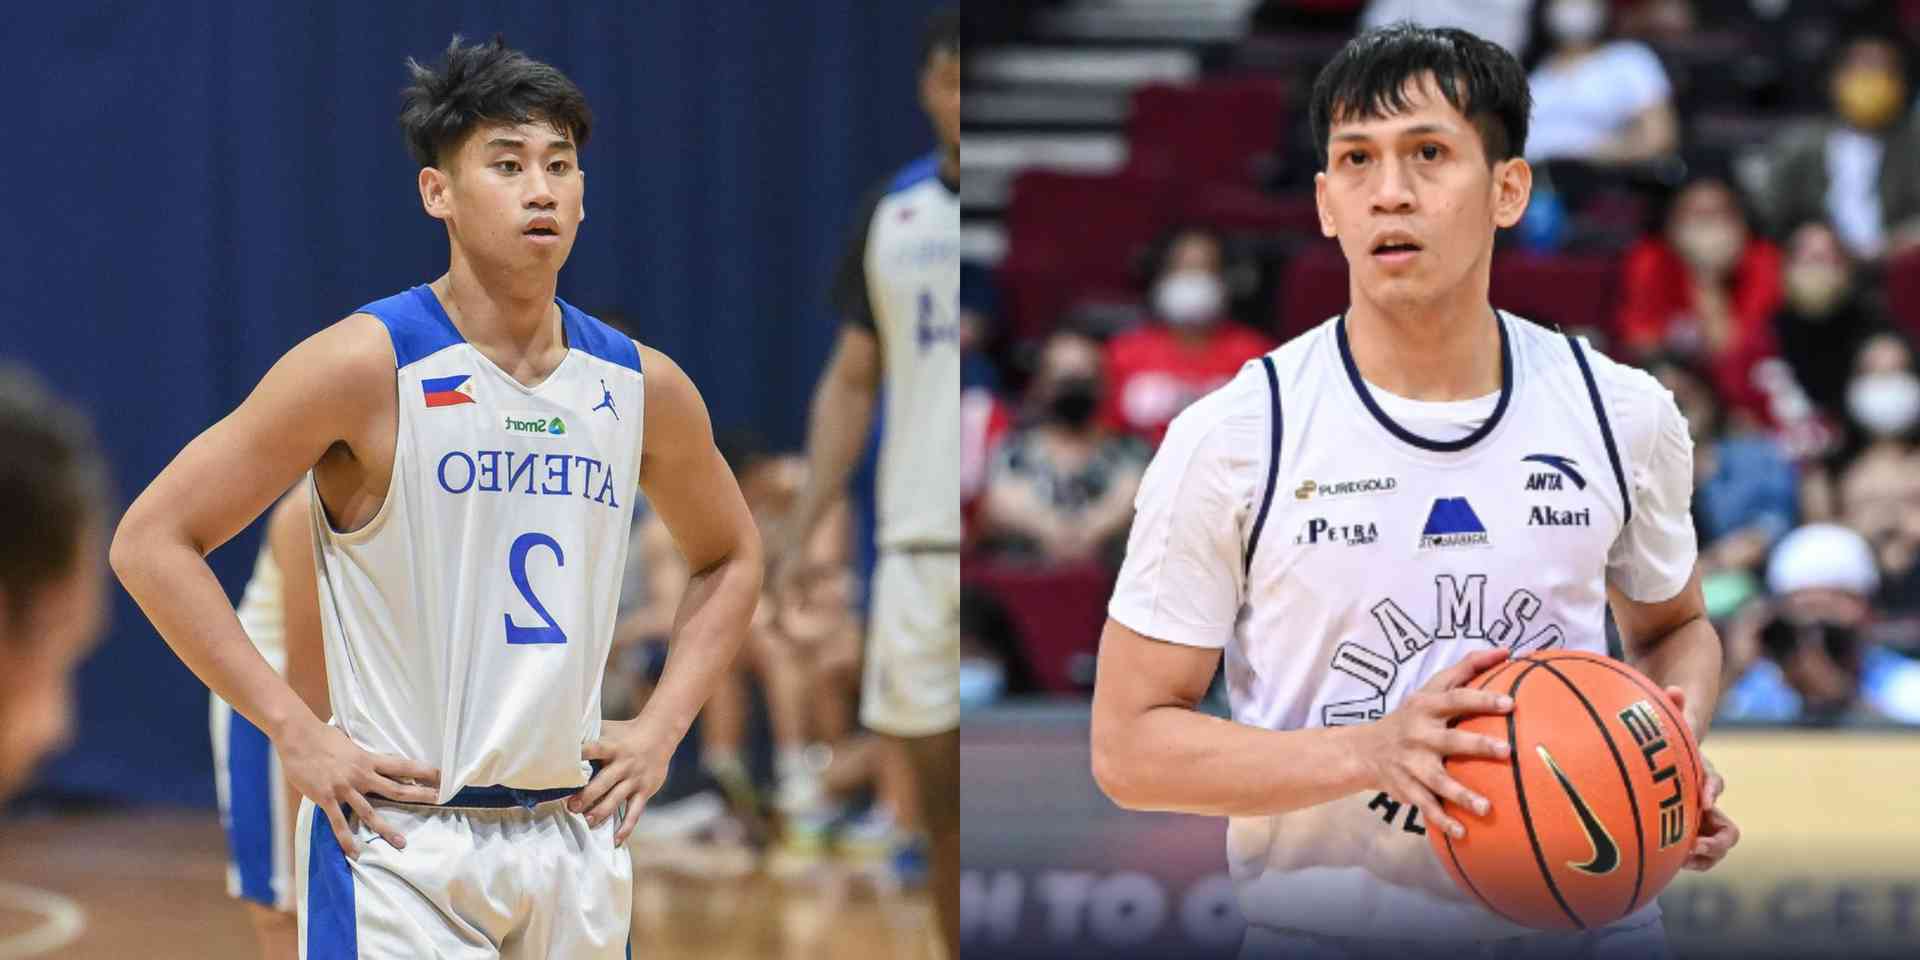 Lastimosa, Andrade stand out among PH Strong Group players